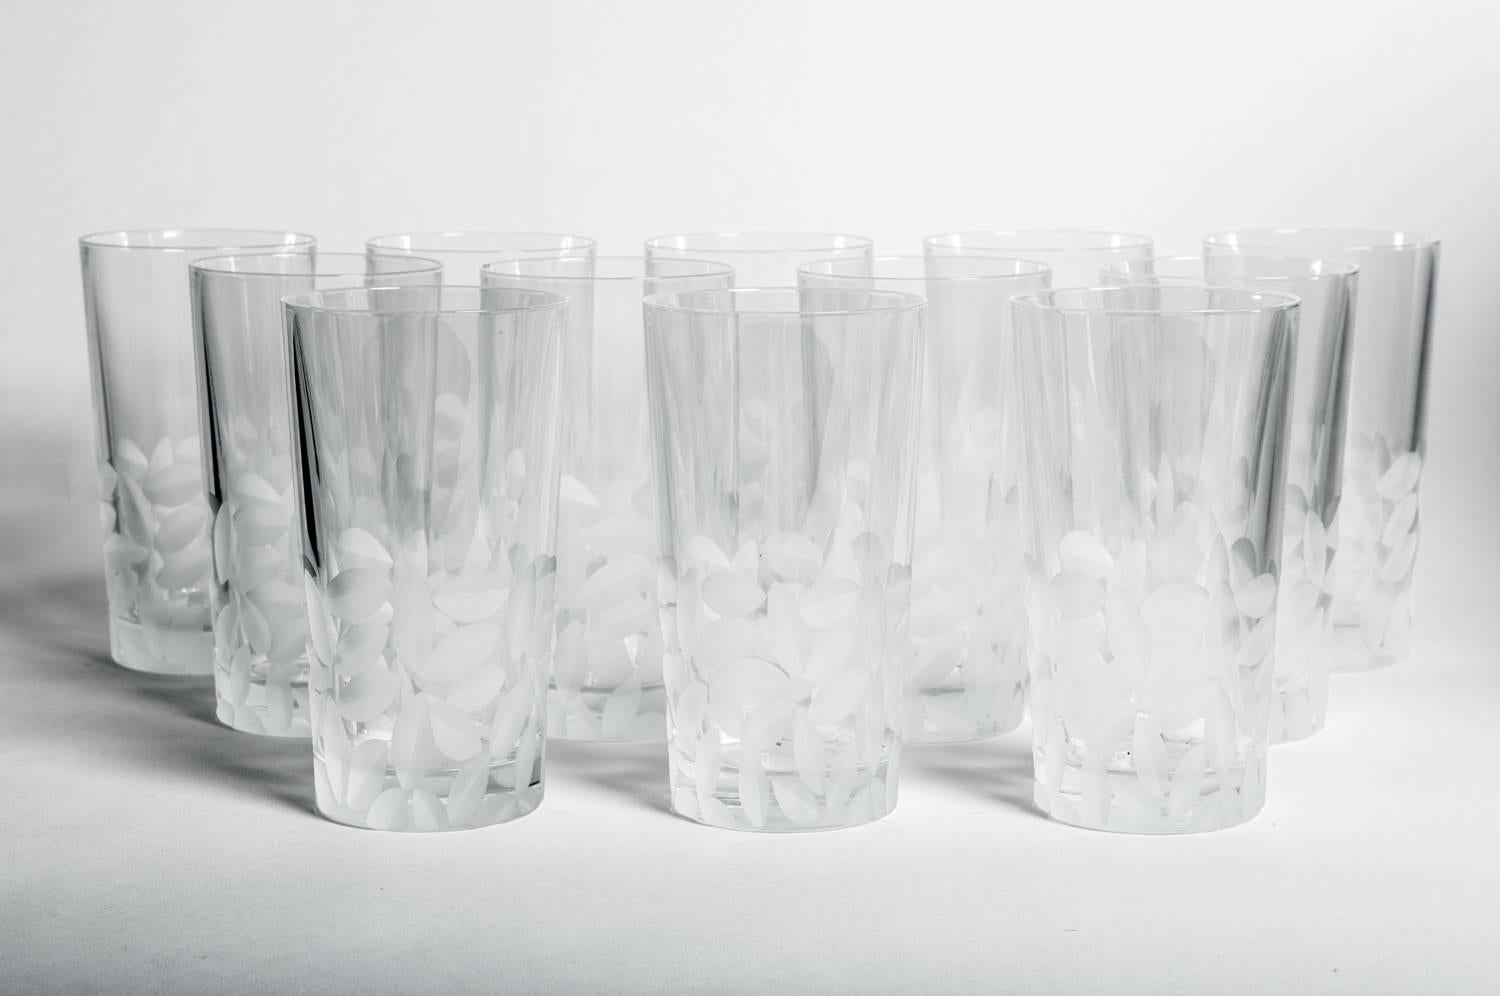 Mid-20th century high ball cut crystal Tiffany drinks glassware set of 12 pieces, in the Clover pattern. Excellent condition. Each high ball glass measure 6 inches high X 3.8 inches top diameter.